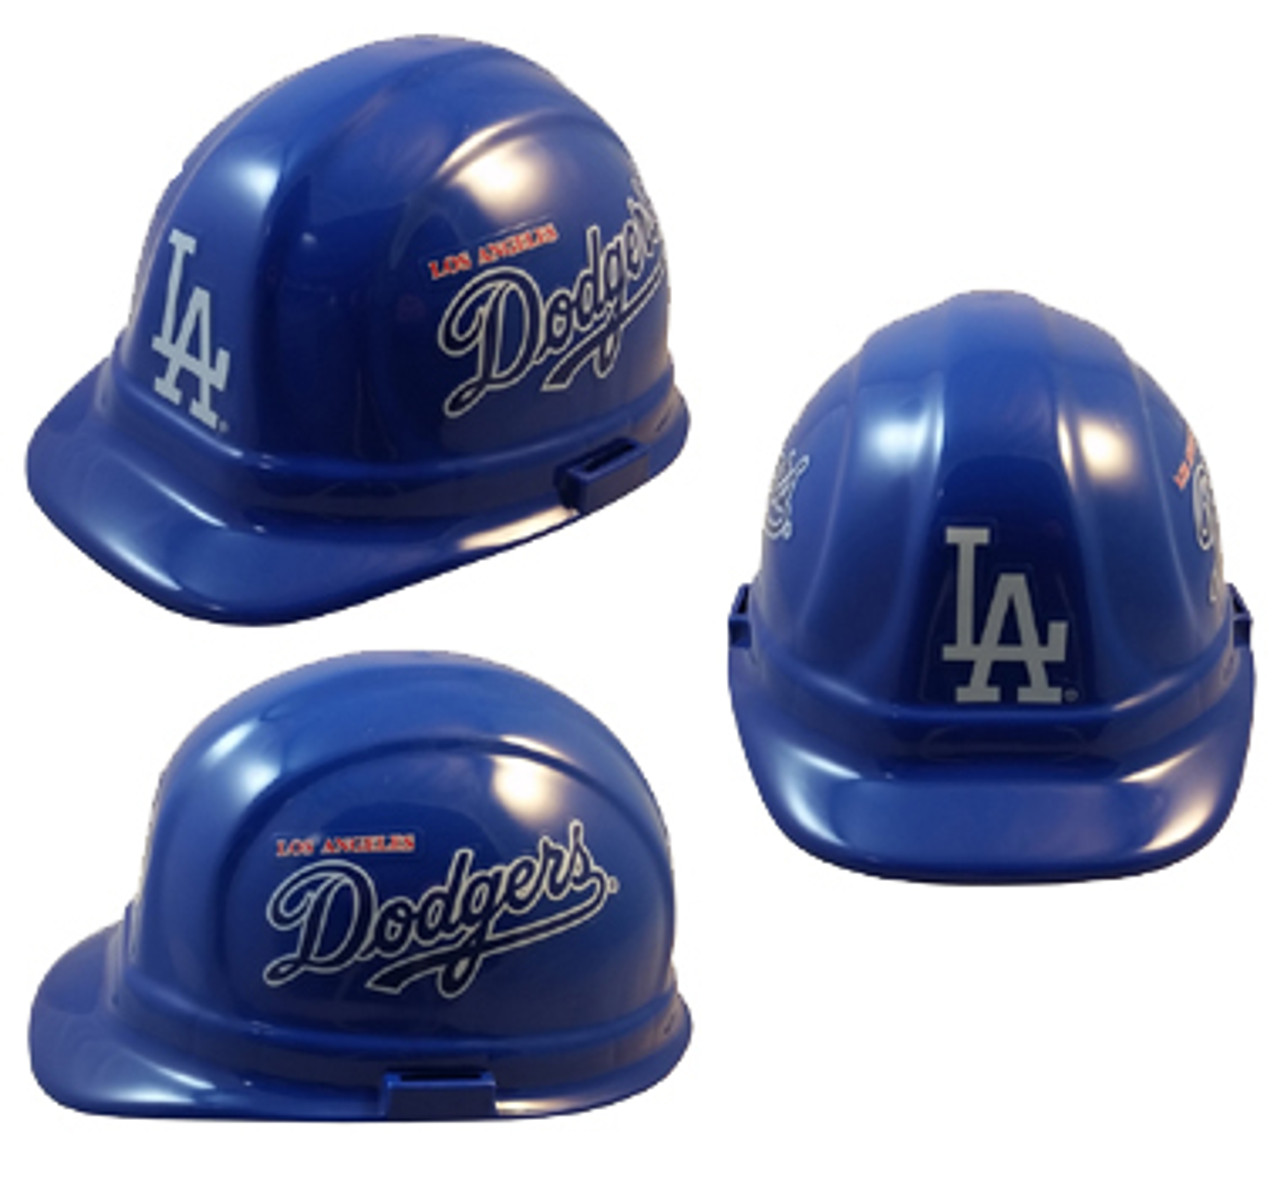 Official Los Angeles Dodgers Gold Program Collection, Dodgers Gold World  Series Jerseys, Hats, Shirts, Gear